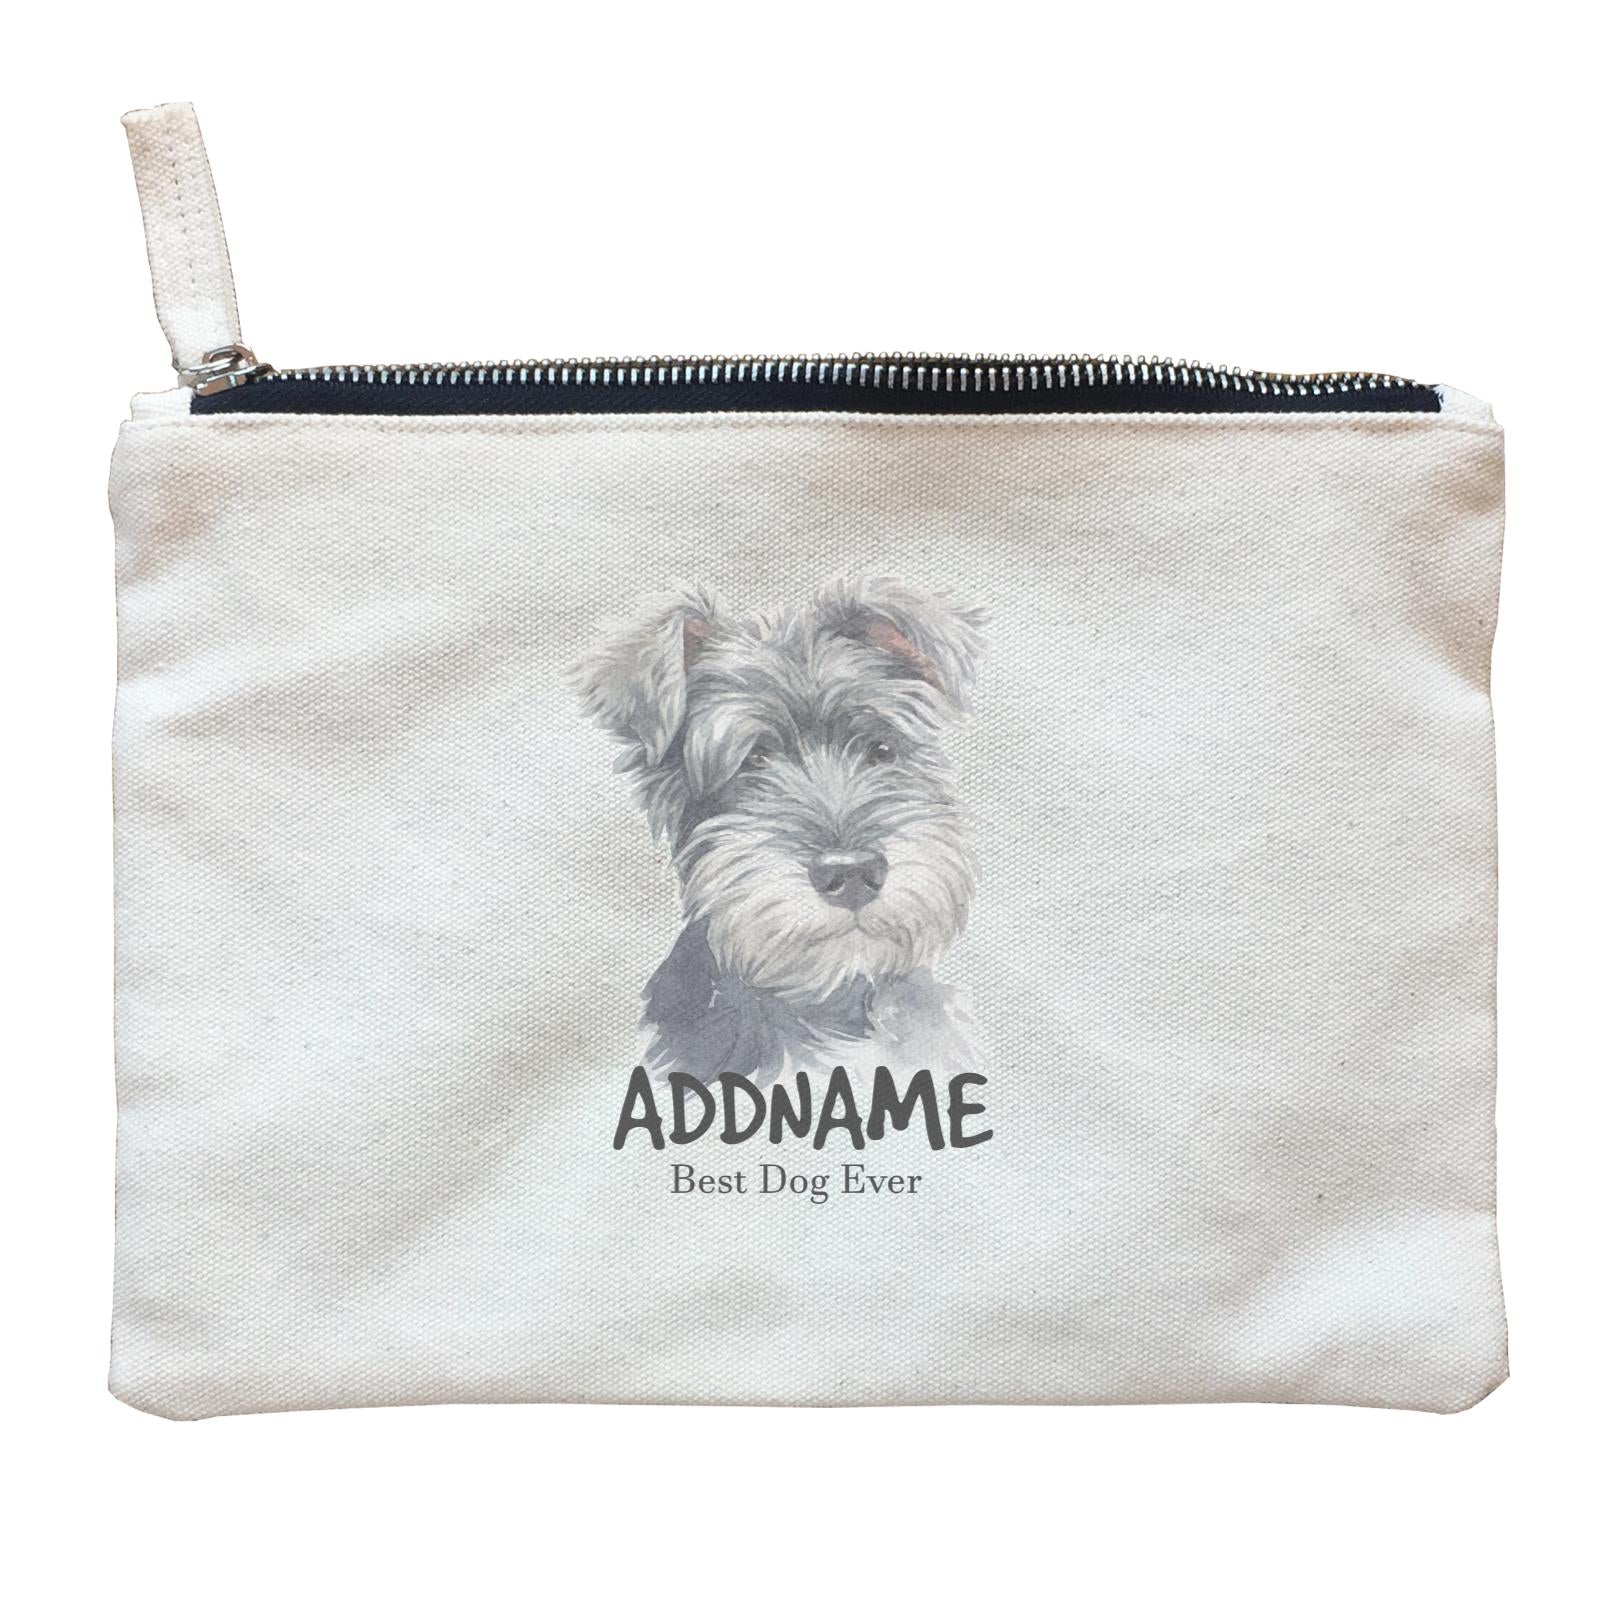 Watercolor Dog Schnauzer Best Dog Ever Addname Zipper Pouch